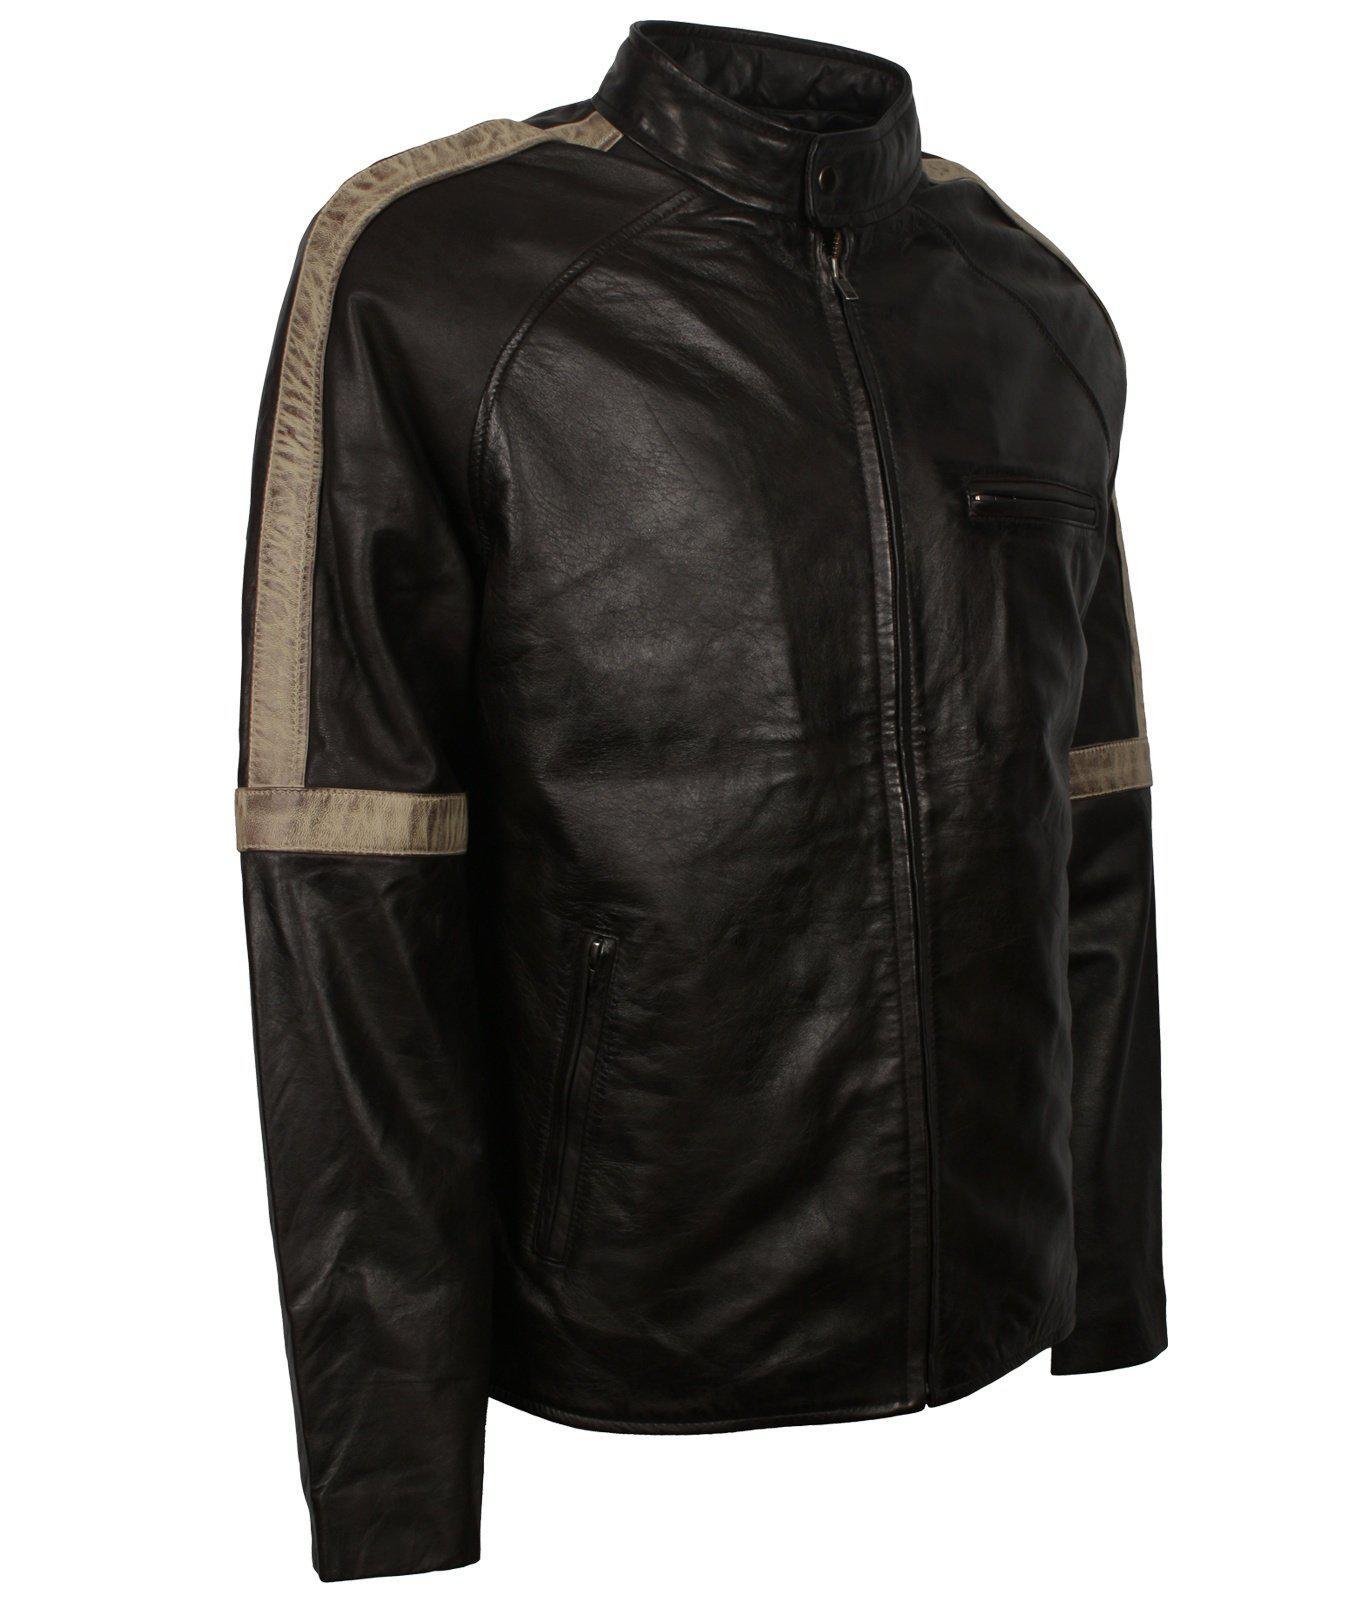 Vintage Jacket Christmas Gifts for Bikers